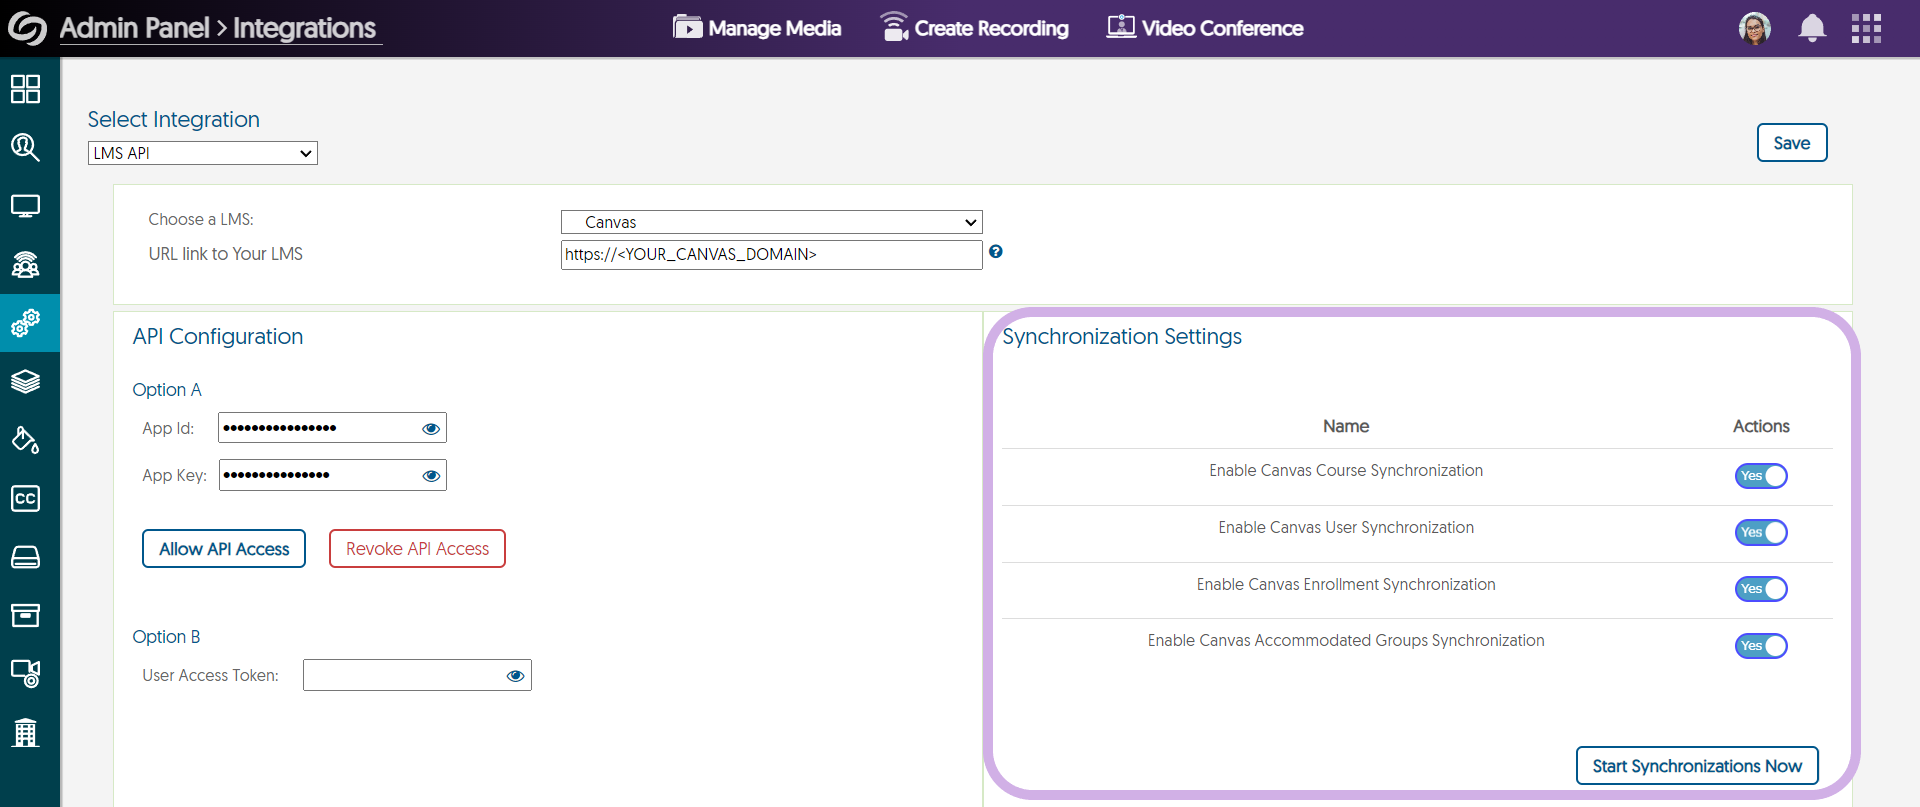 Synchronization settings in the integration page.